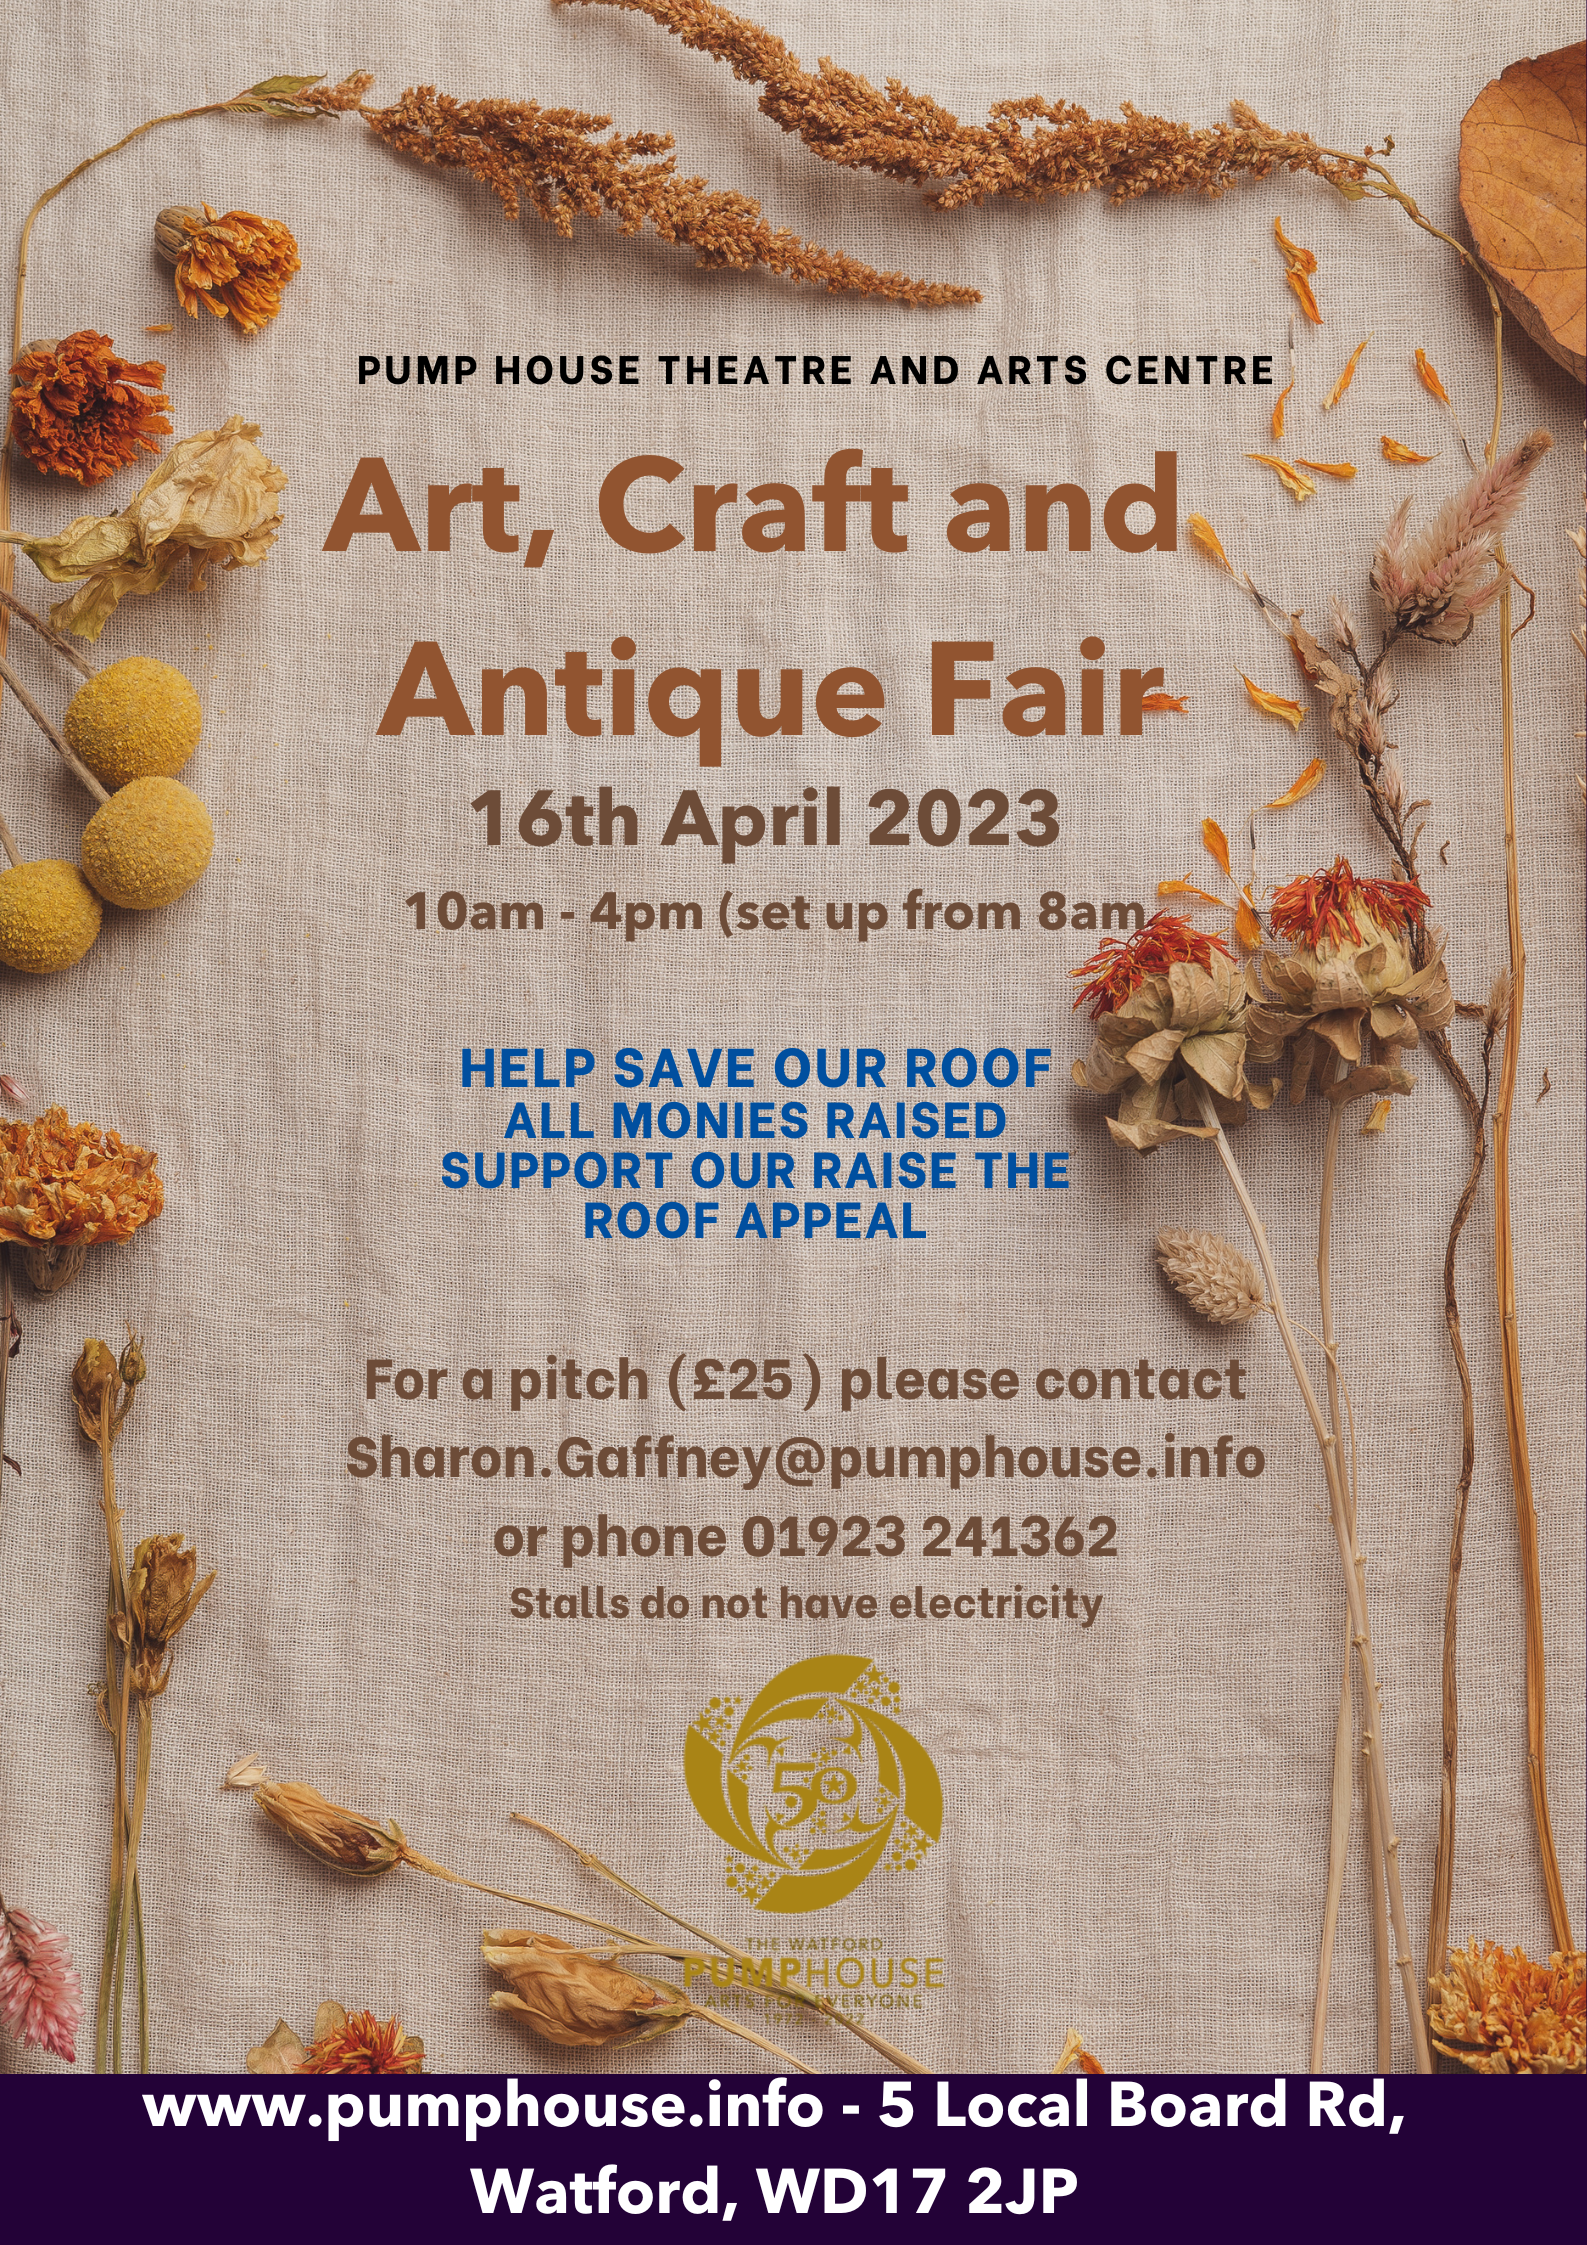 Art, Craft and Antique Fair 16th April 2023        10am – 4pm – Free entry